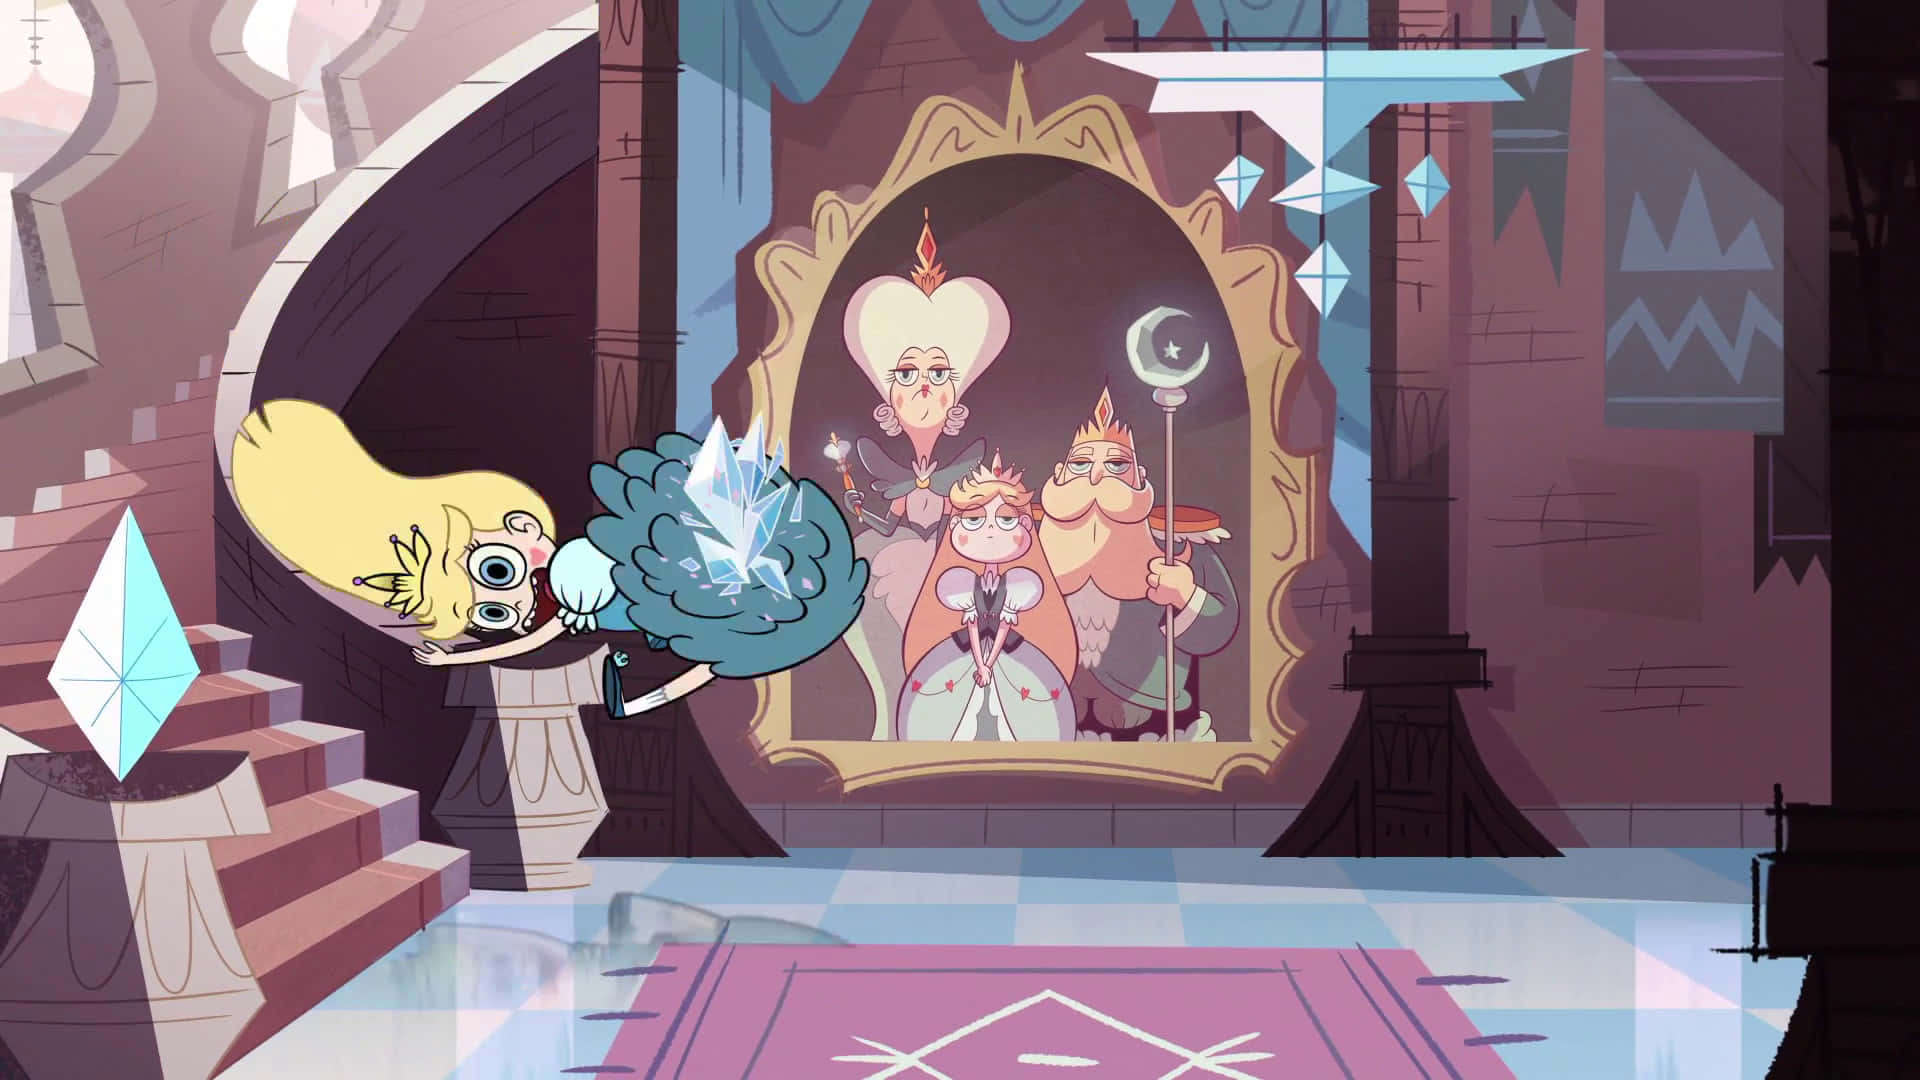 Star Vs. the Forces of Evil characters posing in front of a colorful background